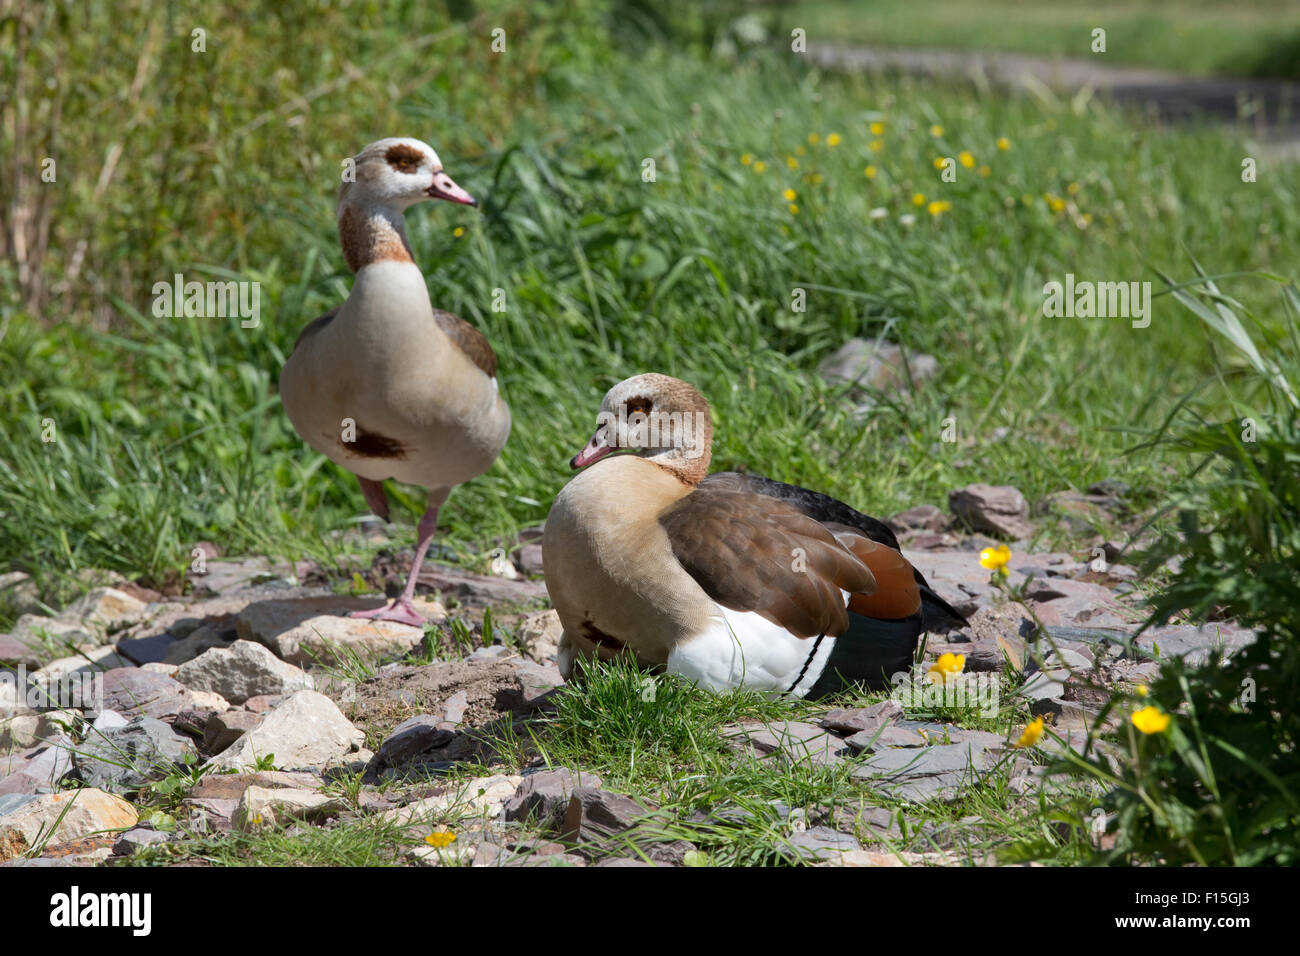 Egyptian geese Alopochen aegyptiaca on banks of Mosel River Germany  Male stands guard over female with chicks under her wing Stock Photo